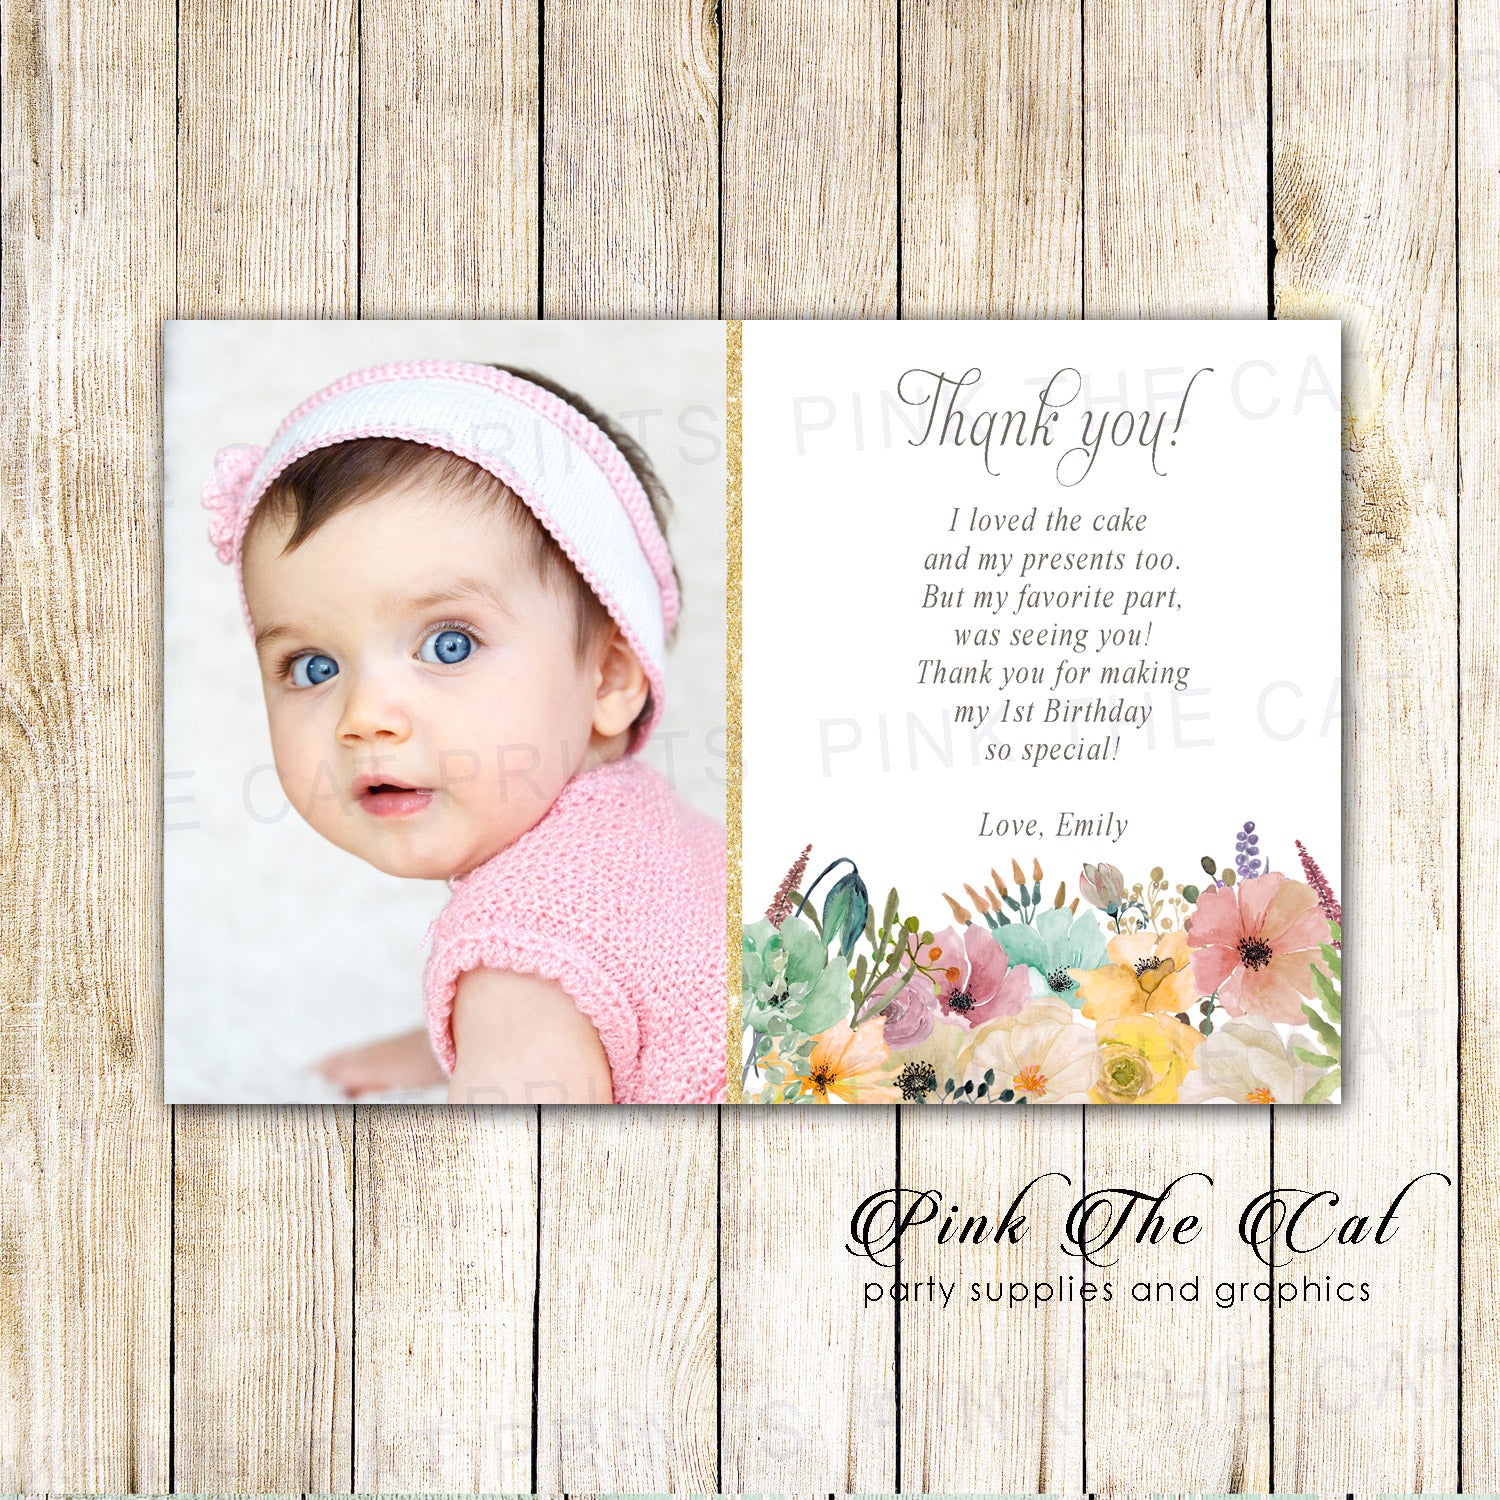 30 Thank you cards girl birthday floral gold with photo